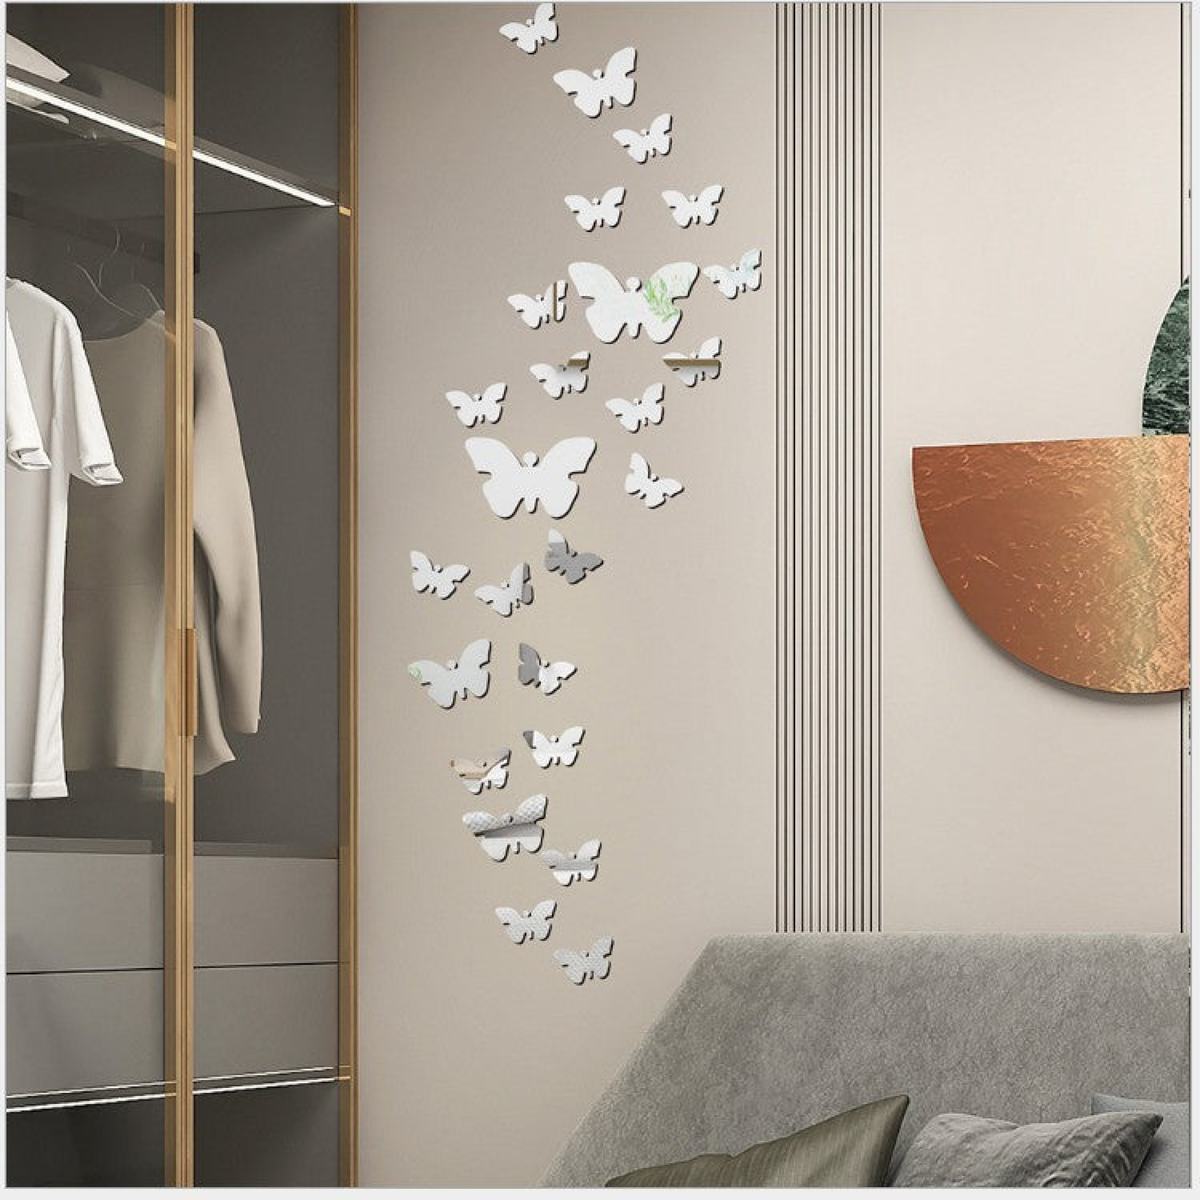 Solacol Wall Mirror Stickers Peel and Stick Mirrors for Wall Stick on Mirrors for Wall 30pcs Butterfly Combination 3D Three-dimensional Mirror Wall